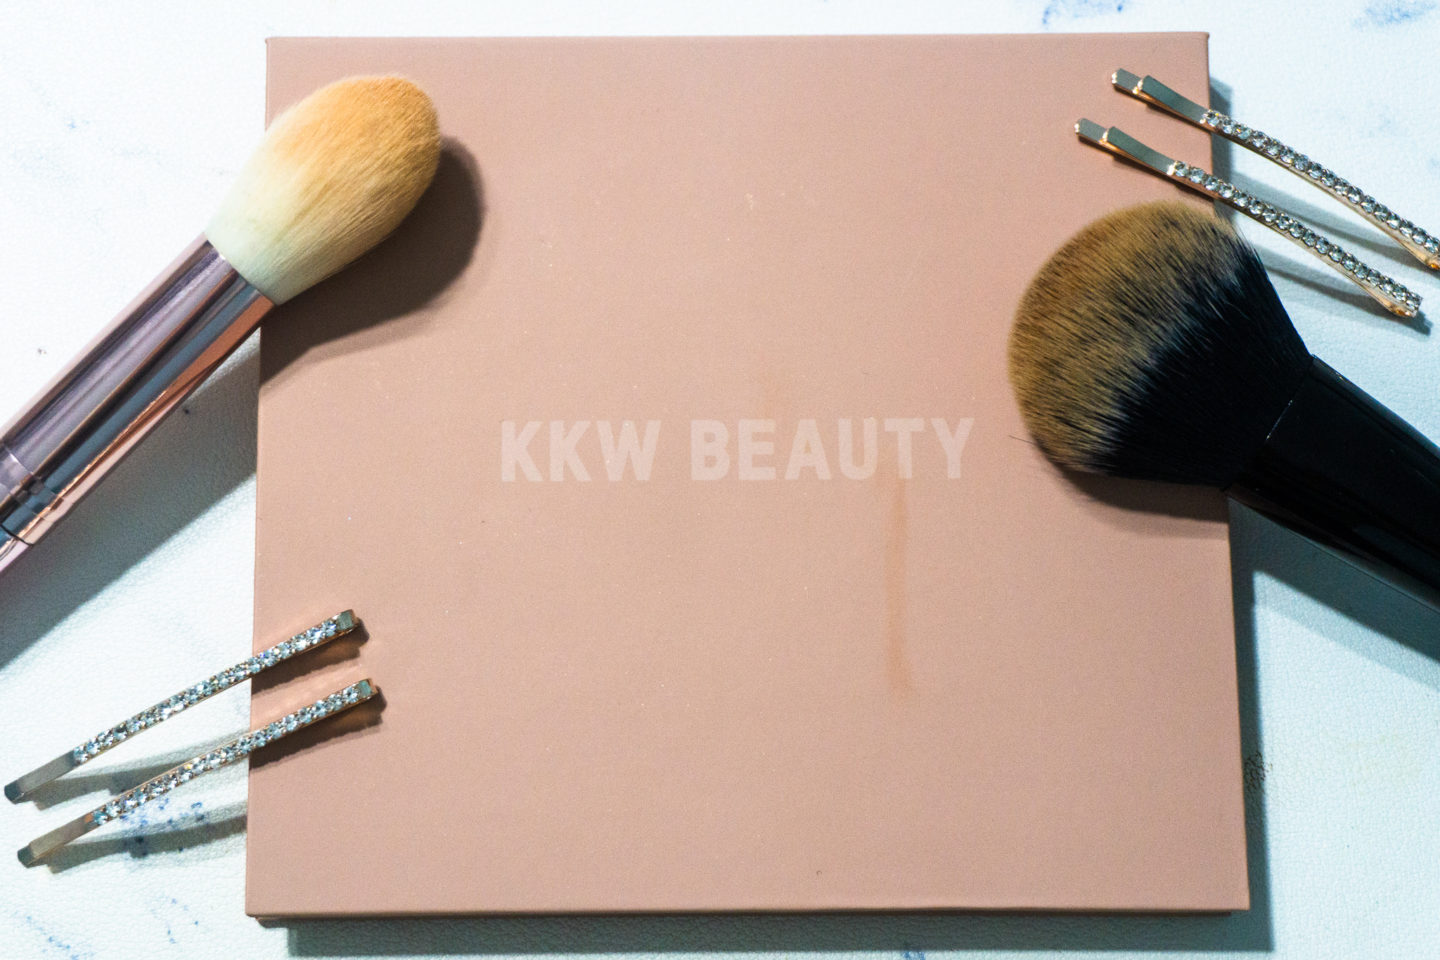 Beauty Pick of the Month: KKW Beauty Powder Contour + Highlight Palette